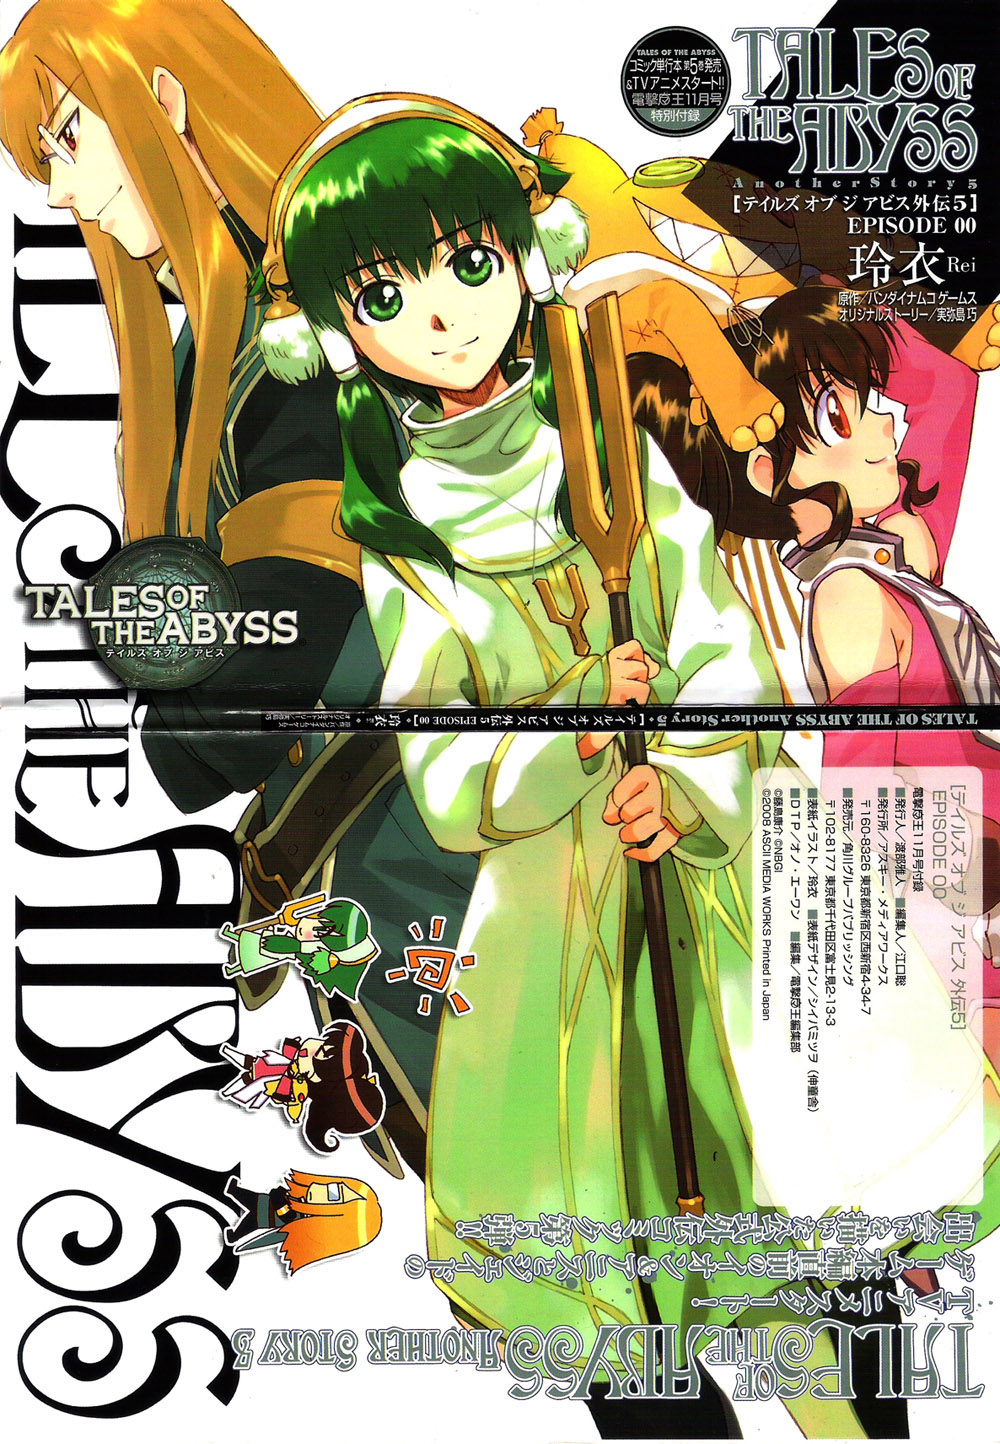 Tales Of The Abyss - Another Story Vol.5 Chapter 0 V2 : Another Story 5: Ion, Anise, And Jade Gaiden: Episode 00 [End] - Picture 2